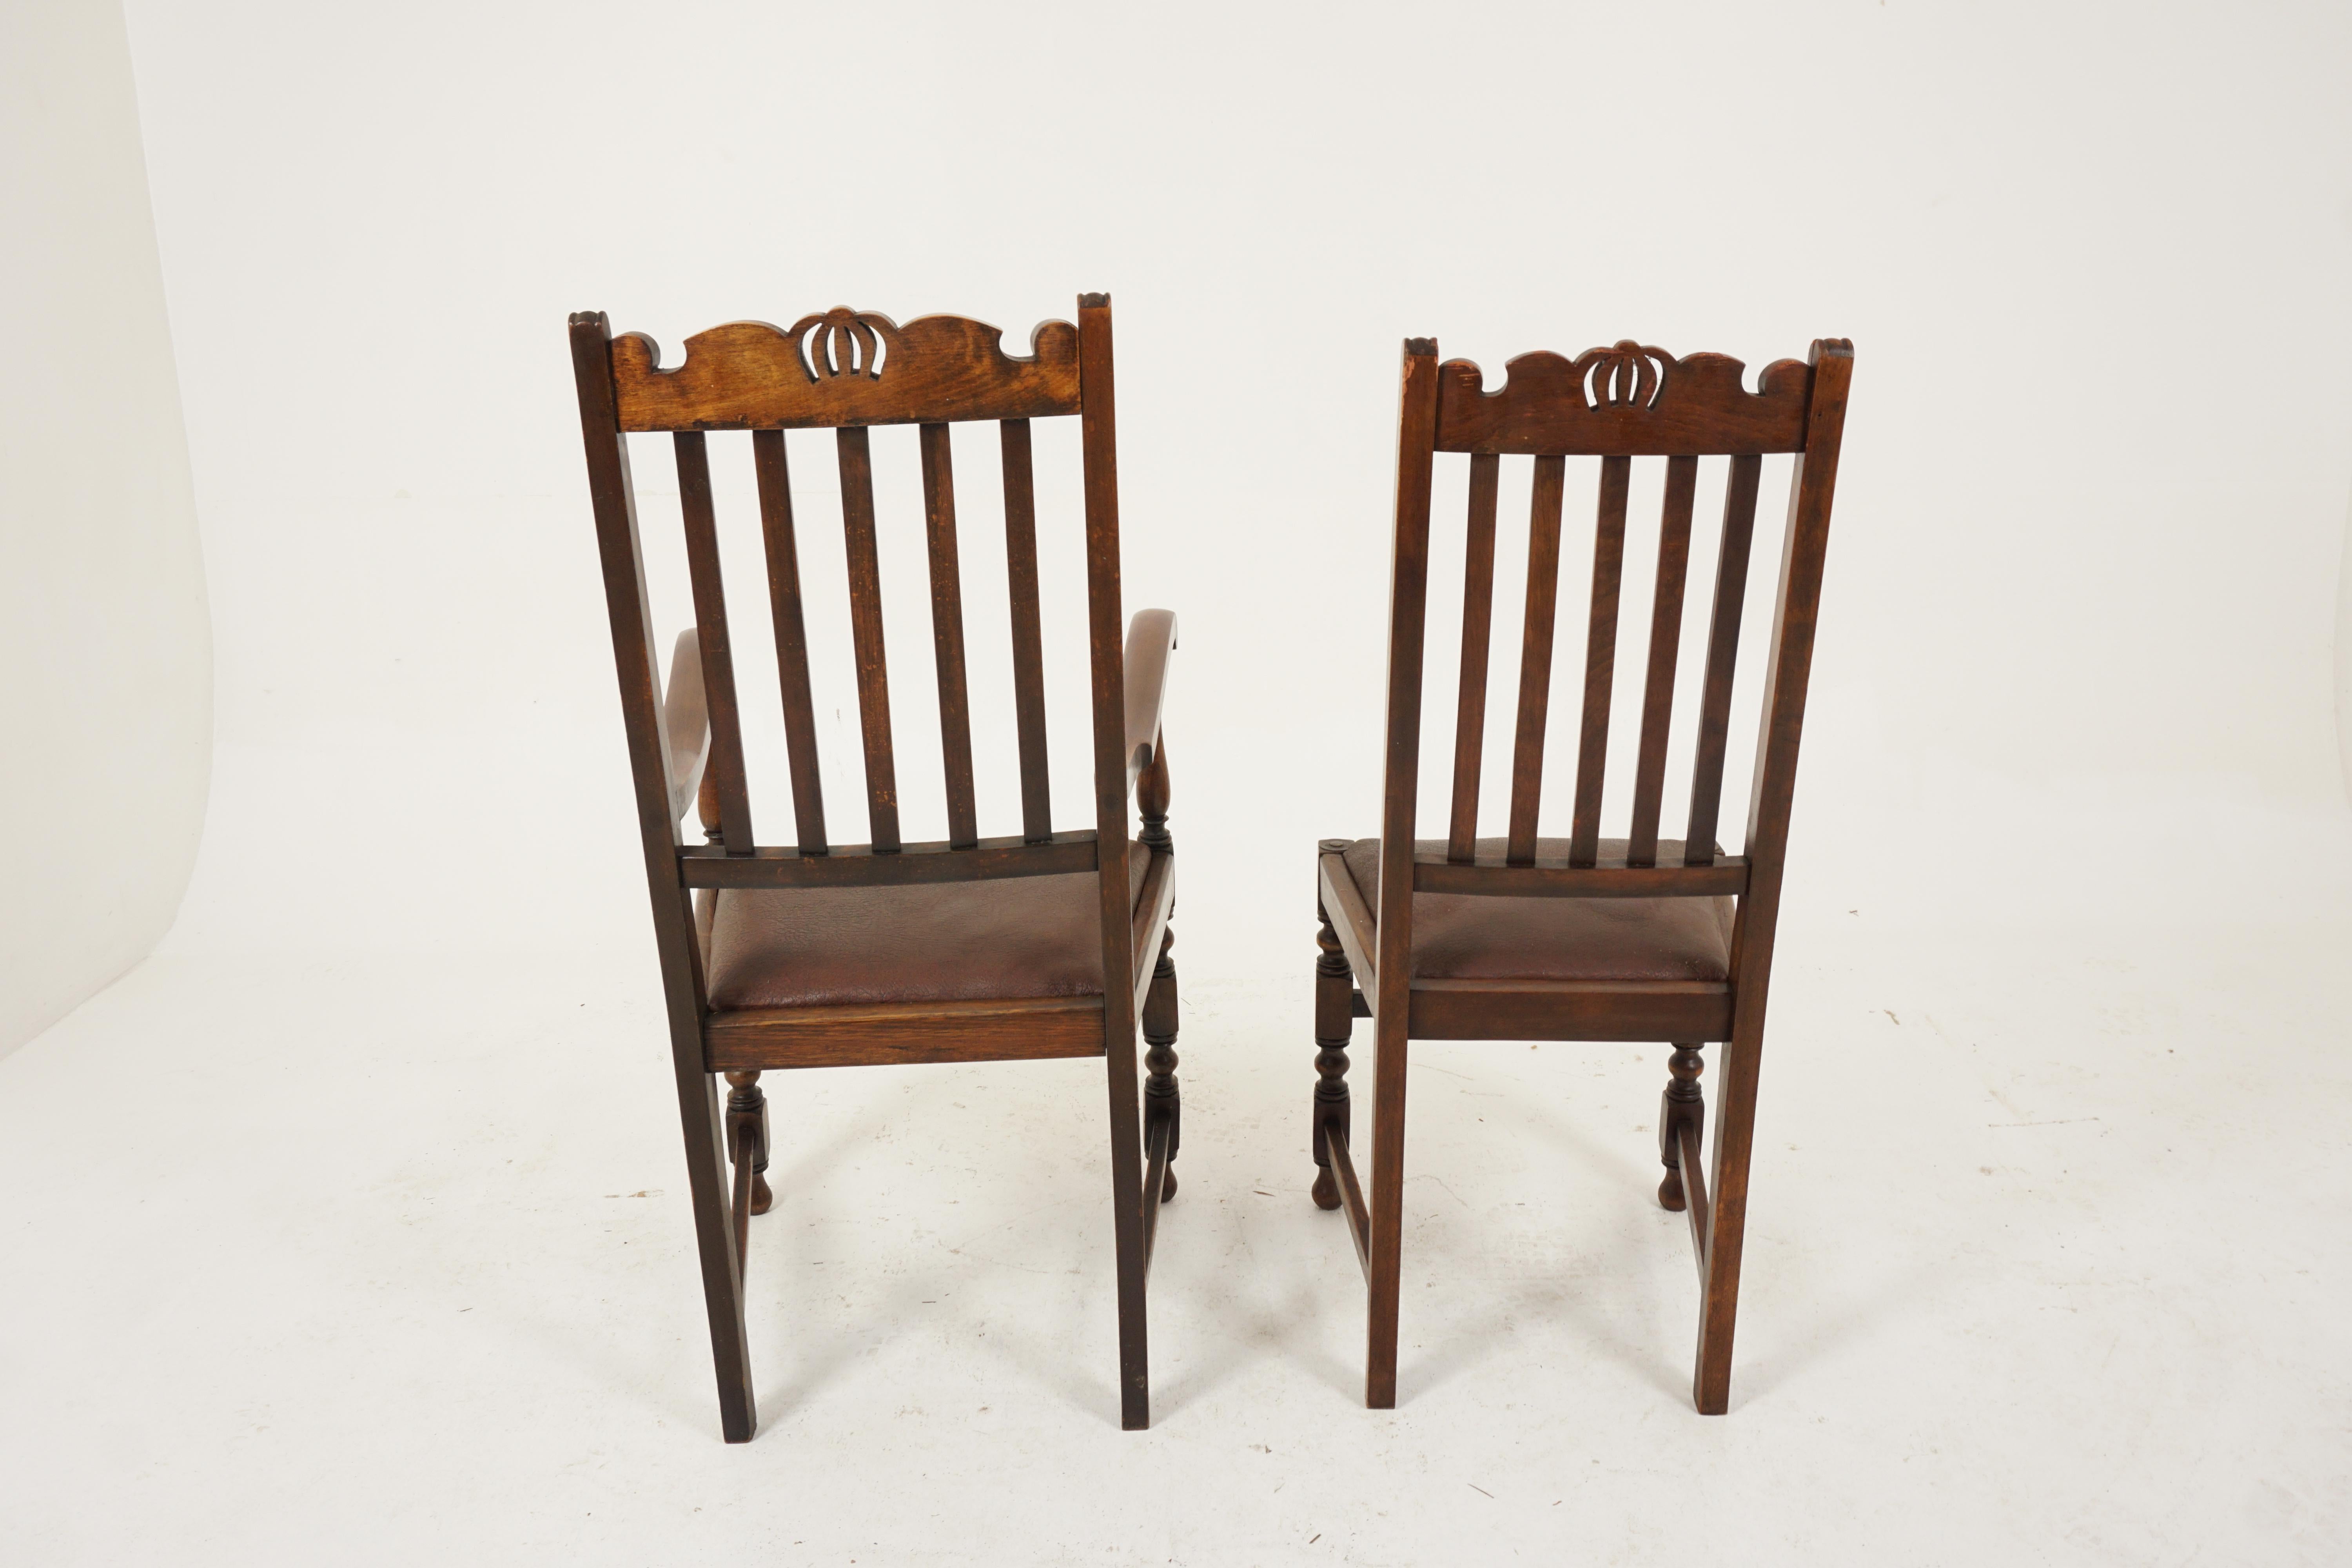 Early 20th Century Antique Dining Chair, Set of 6, Carved Oak, Turned Legs, Scotland 1920, B2674